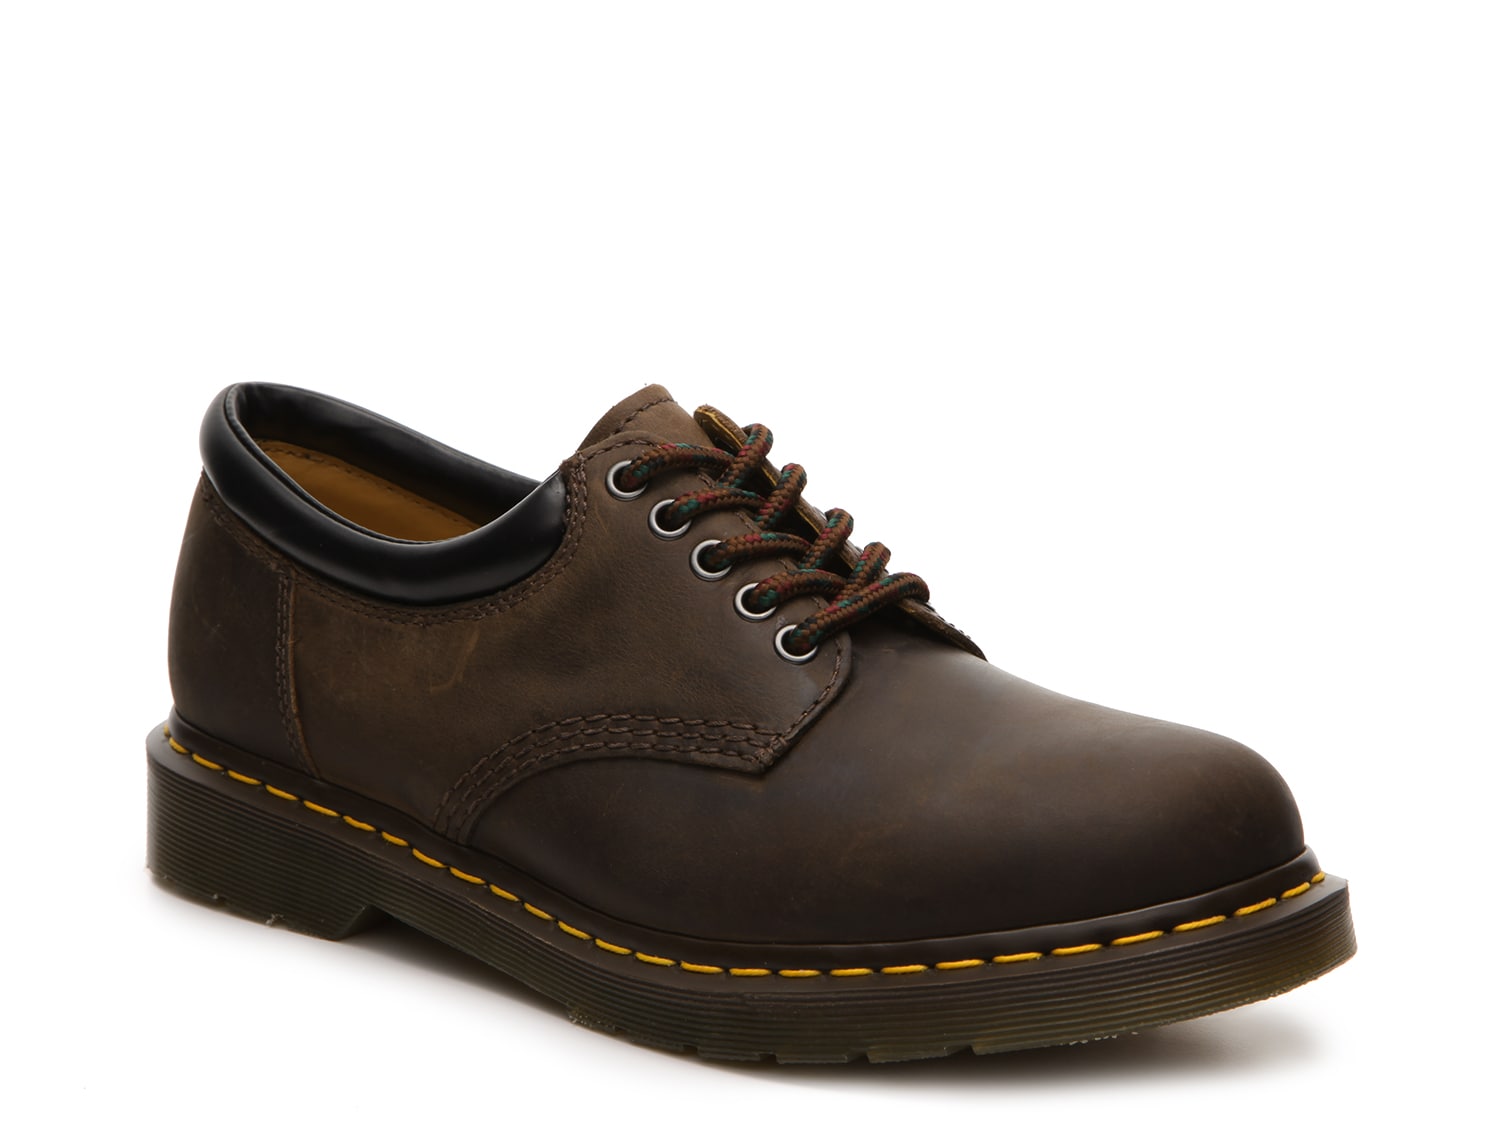 Dr. Martens 8053 Oxford - Men's - Free Shipping | DSW